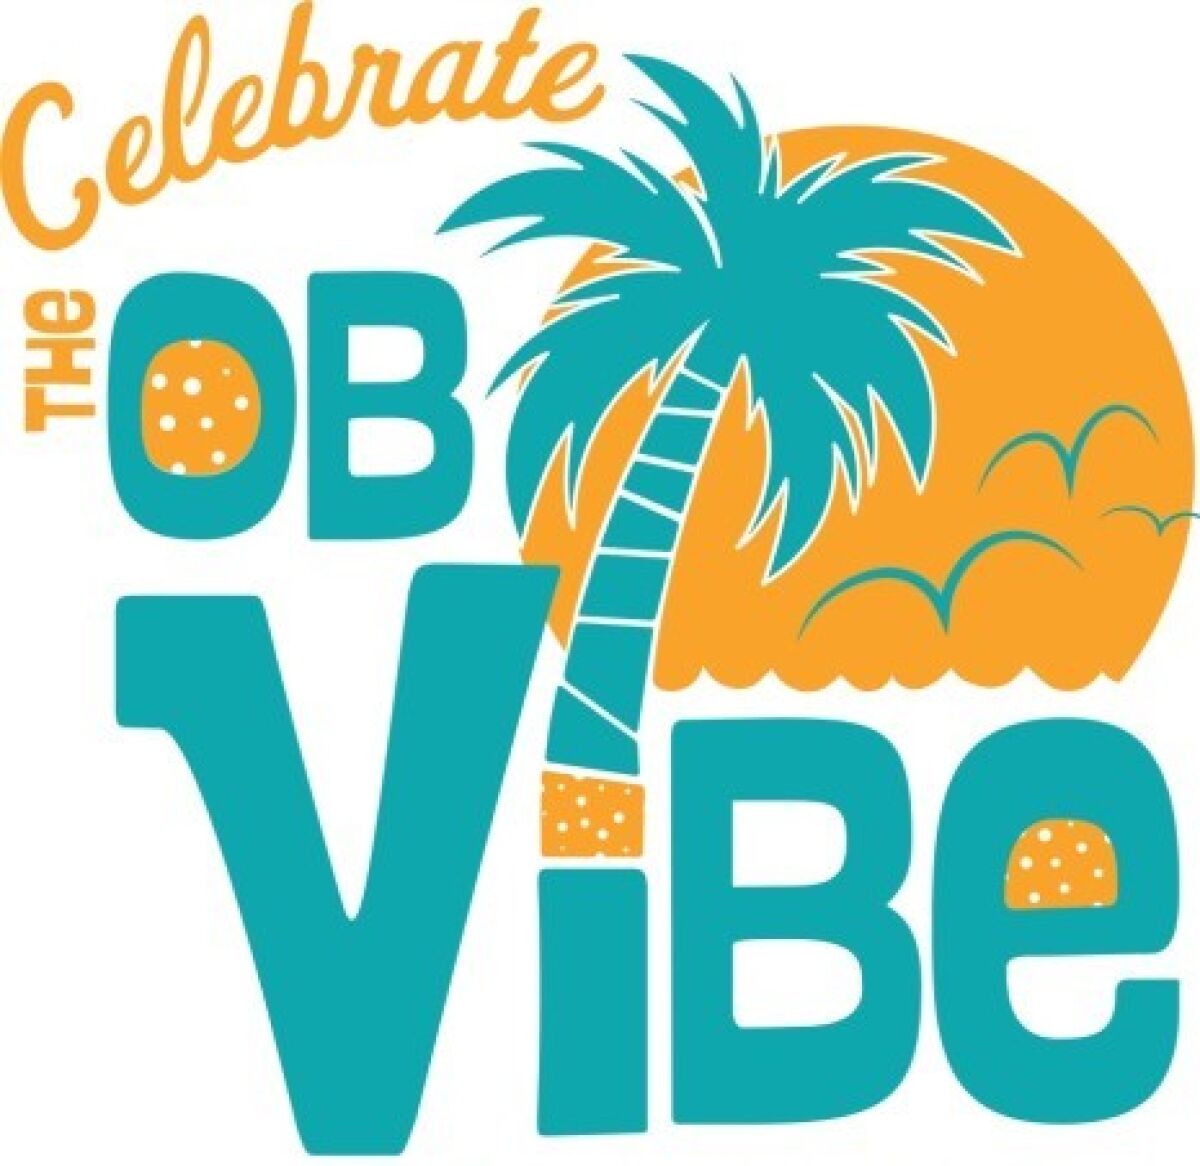 "Celebrate the OB Vibe" on June 26 will feature Ocean Beach artisans, bars, breweries, restaurants, retailers and more.